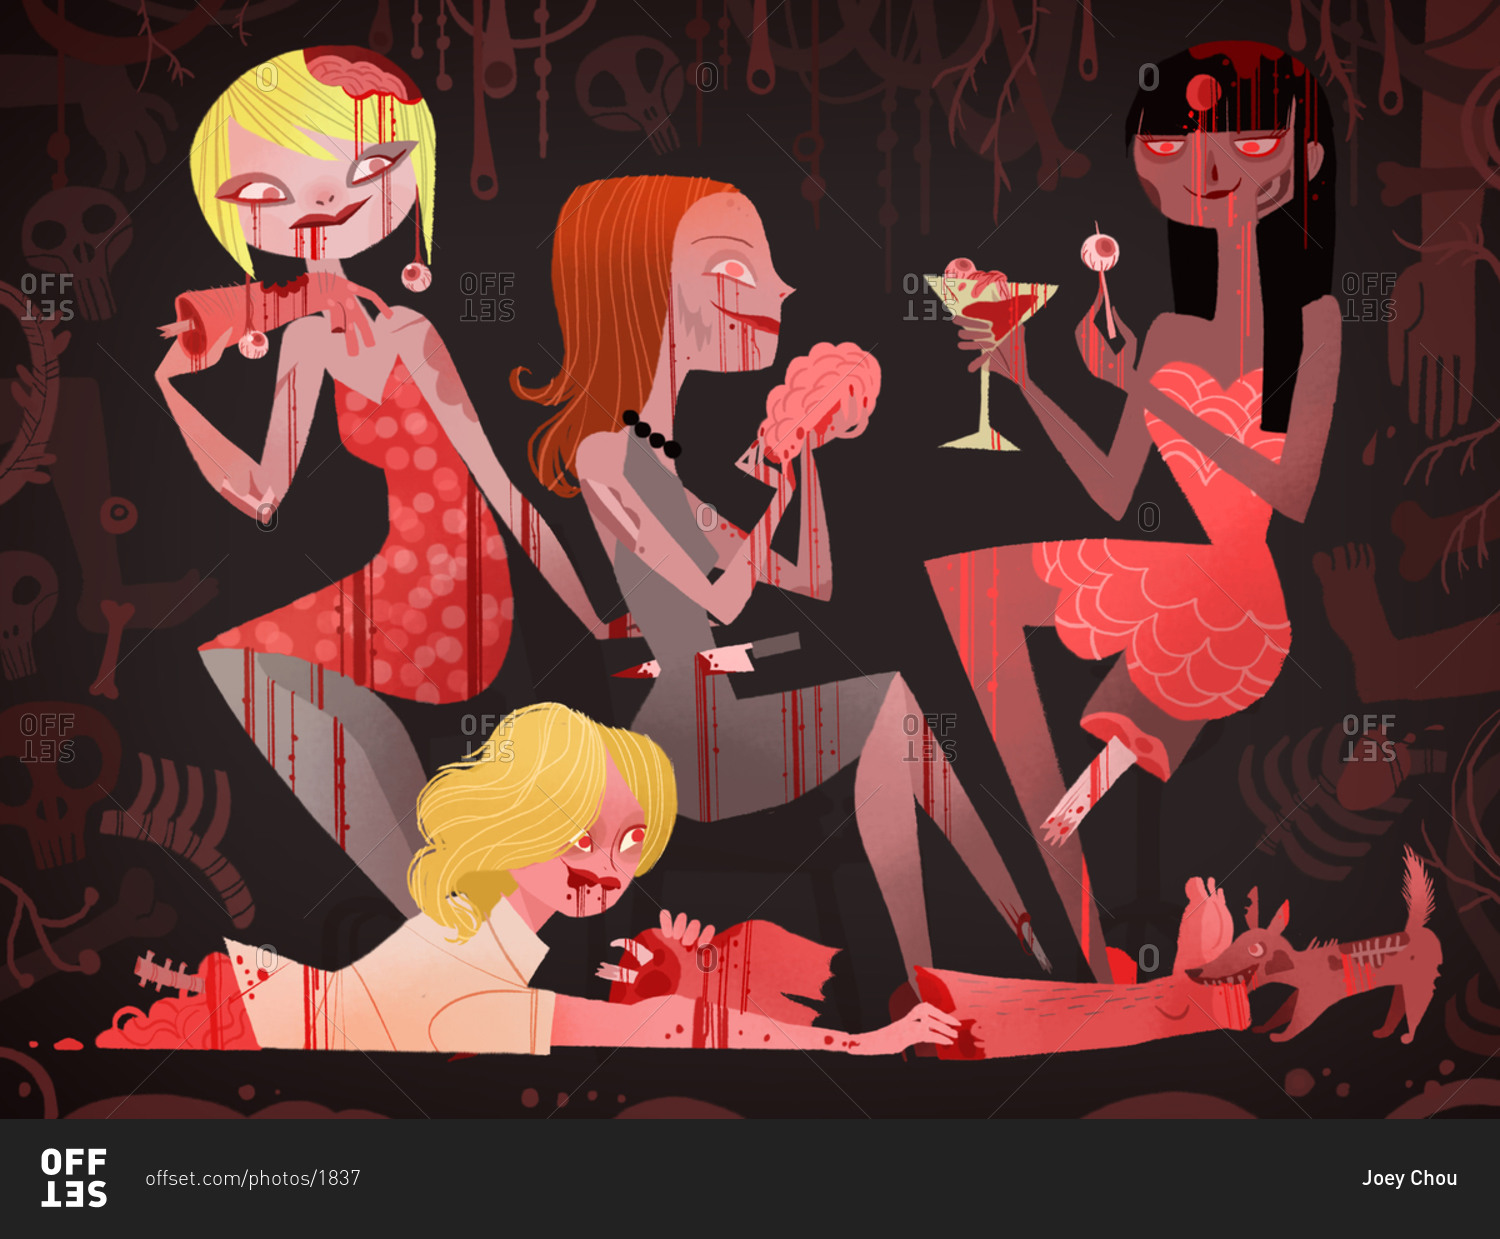 Female zombies in party dresses feasting on human flesh and eyeball cocktails